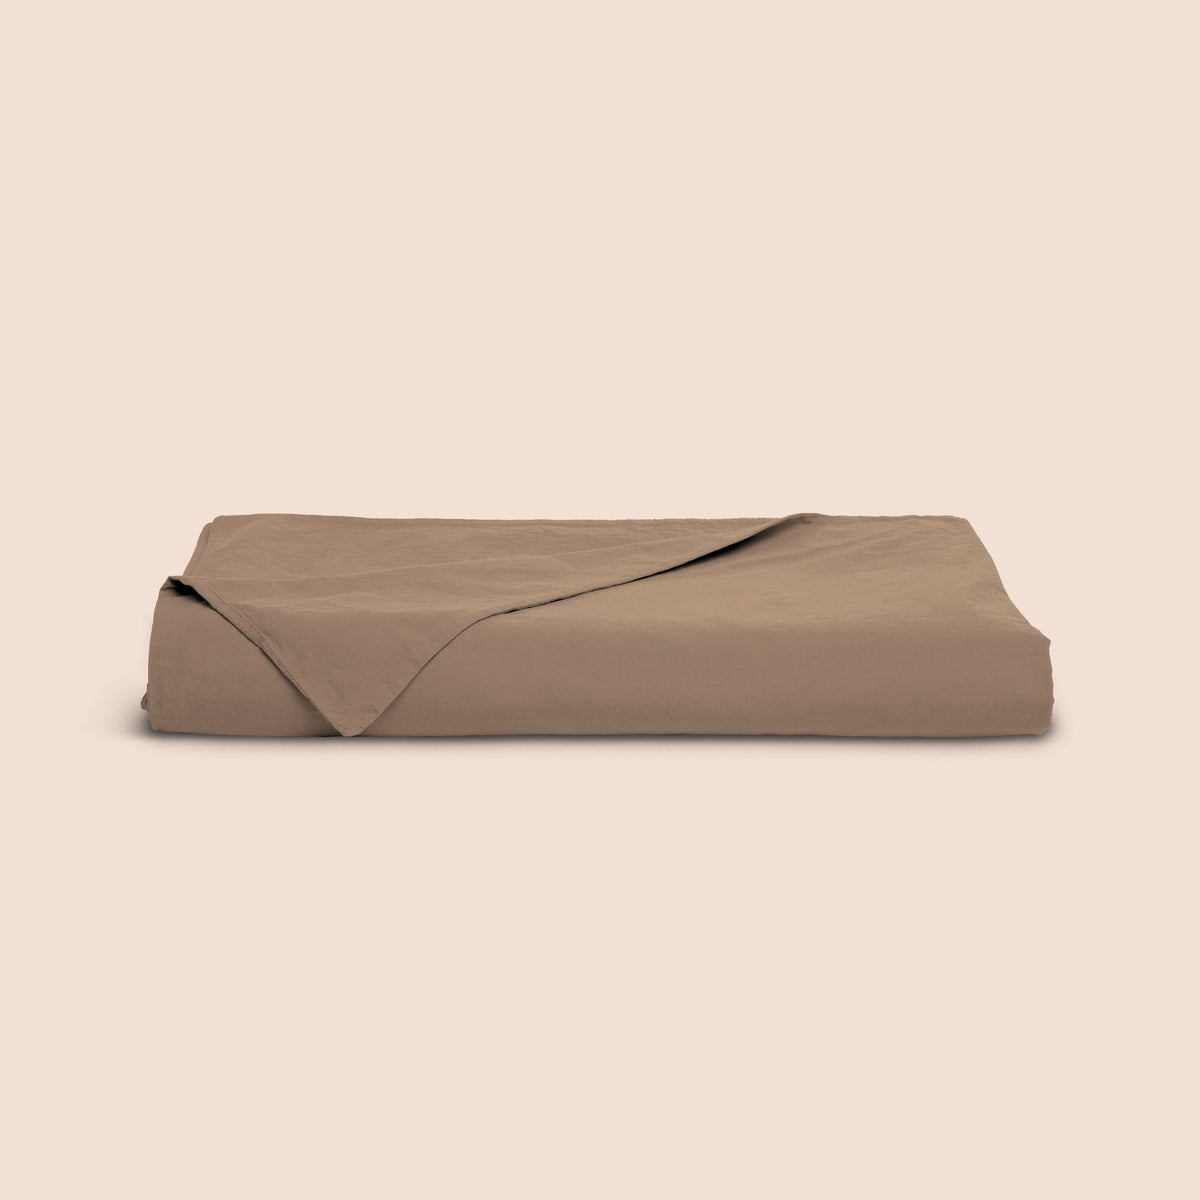 Image of a Desert Sand Garment Washed Percale Duvet Cover neatly folded with one corner draped towards the front on a light pink background